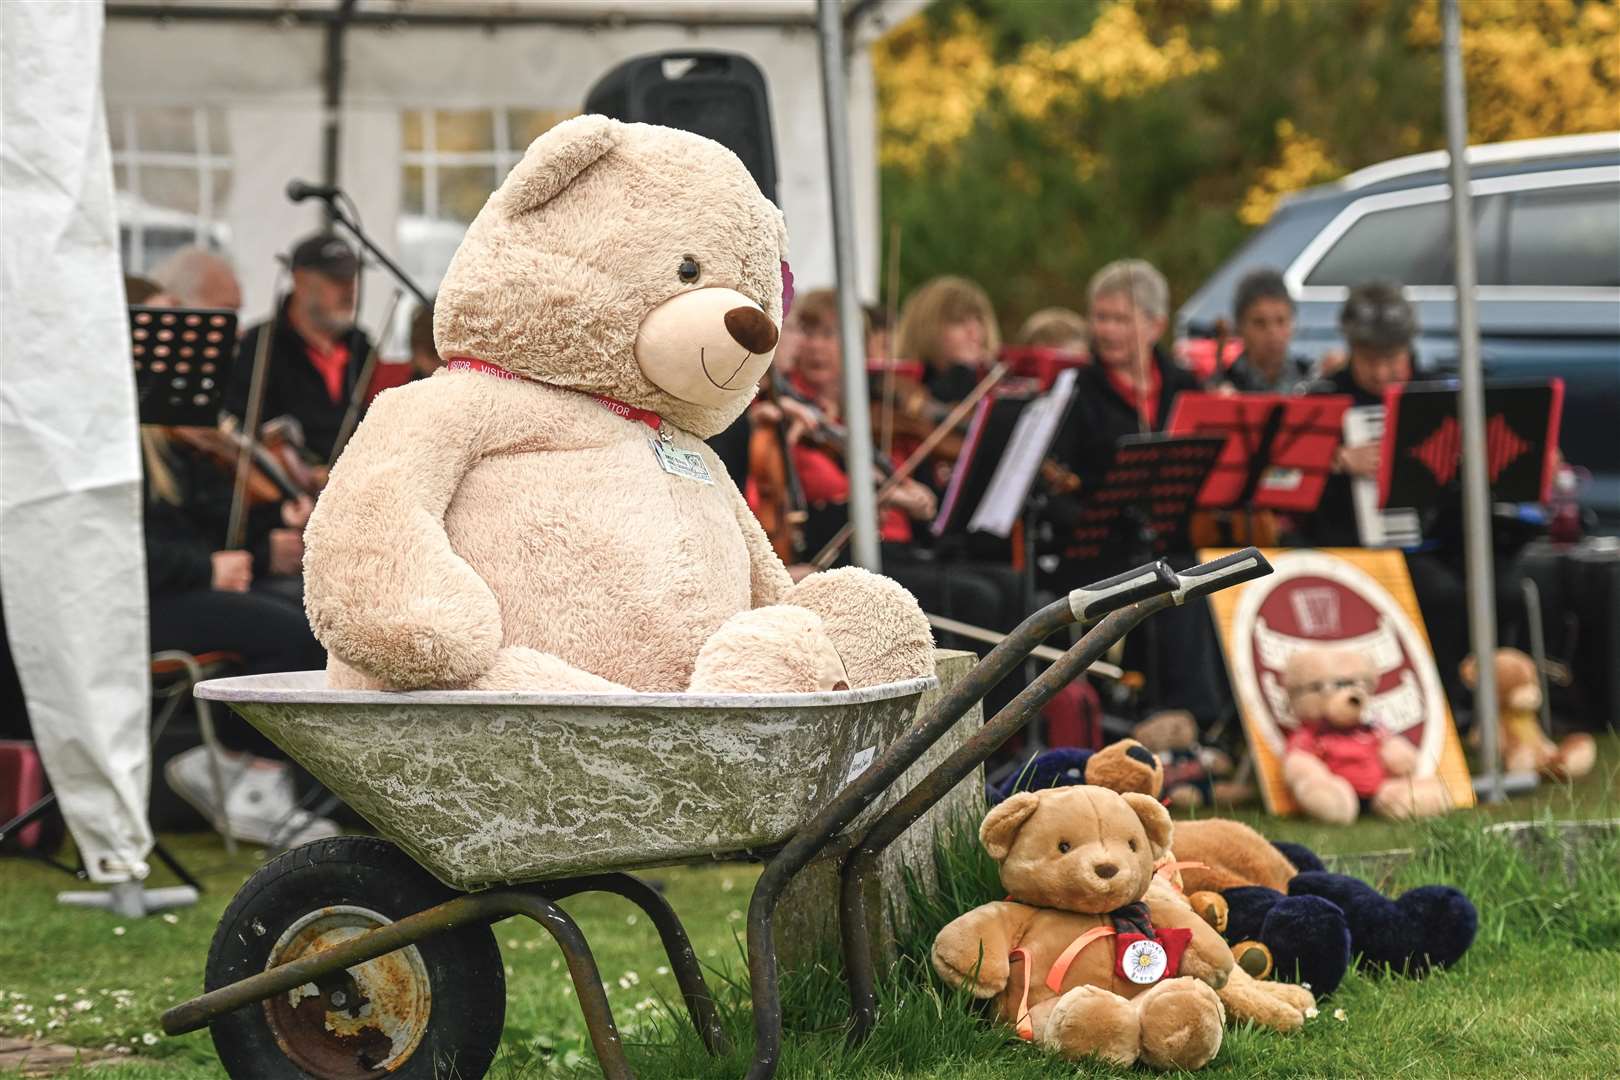 The event had a 'Royal Teddy Bears Picnic Party' theme. Picture: Ewen Pryde Photography